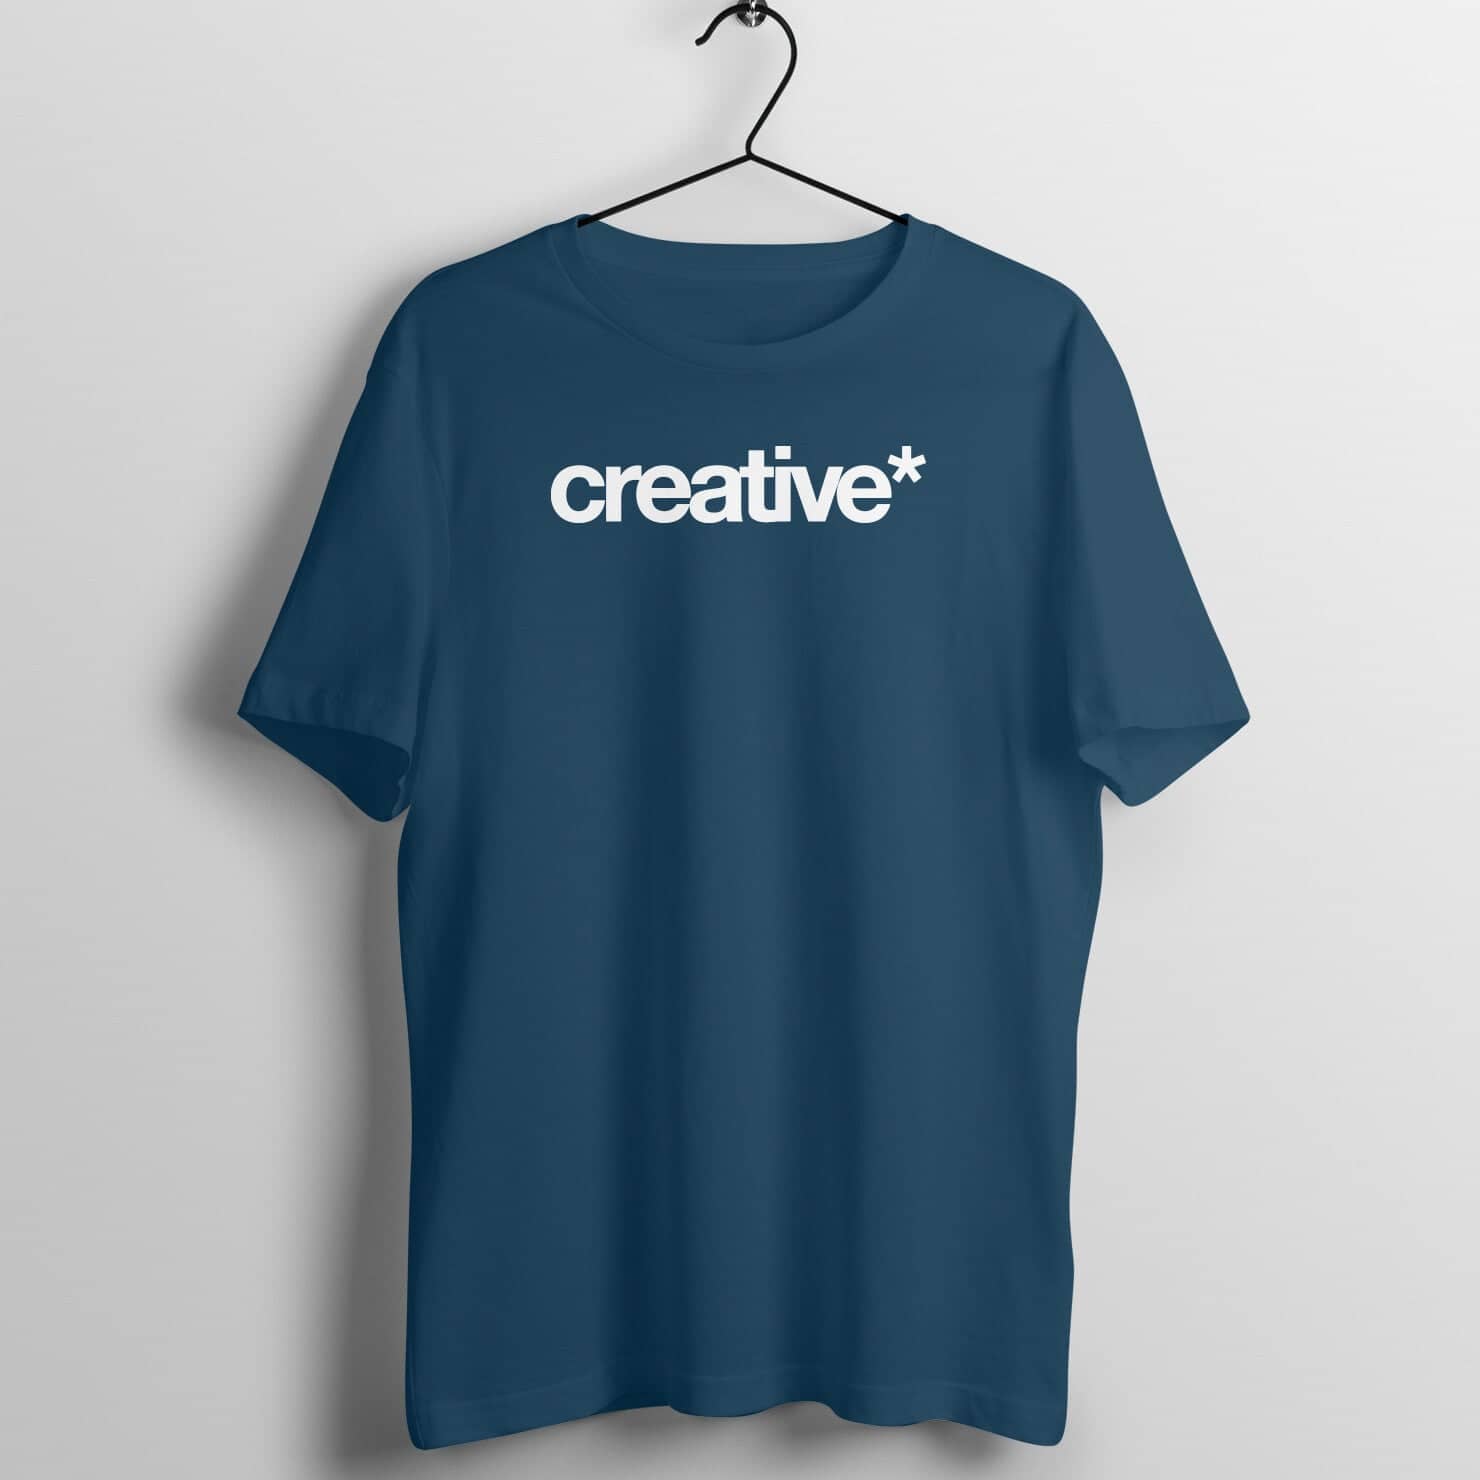 Creative Exclusive Artistic Navy Blue T Shirt for Men and Women Printrove Navy Blue S 